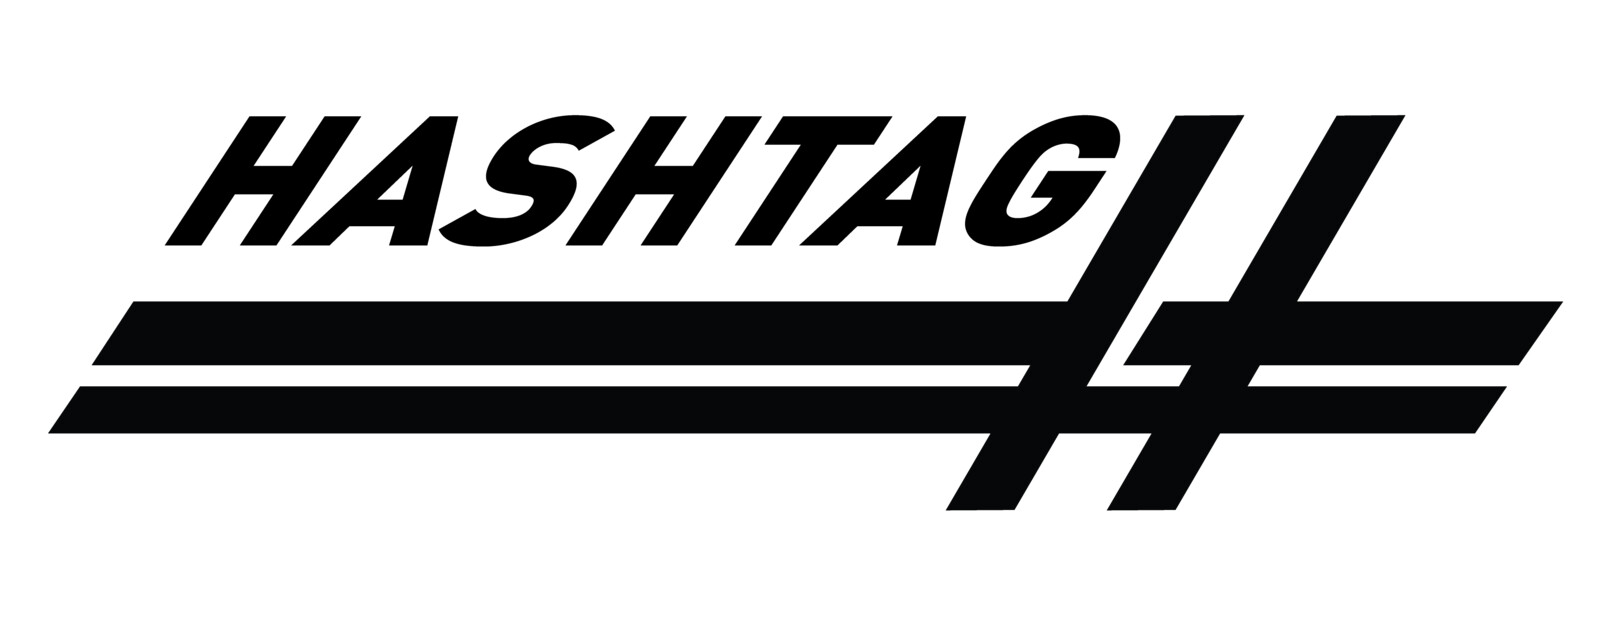 Hashtag (Need for Speed Payback in-development logo/name).